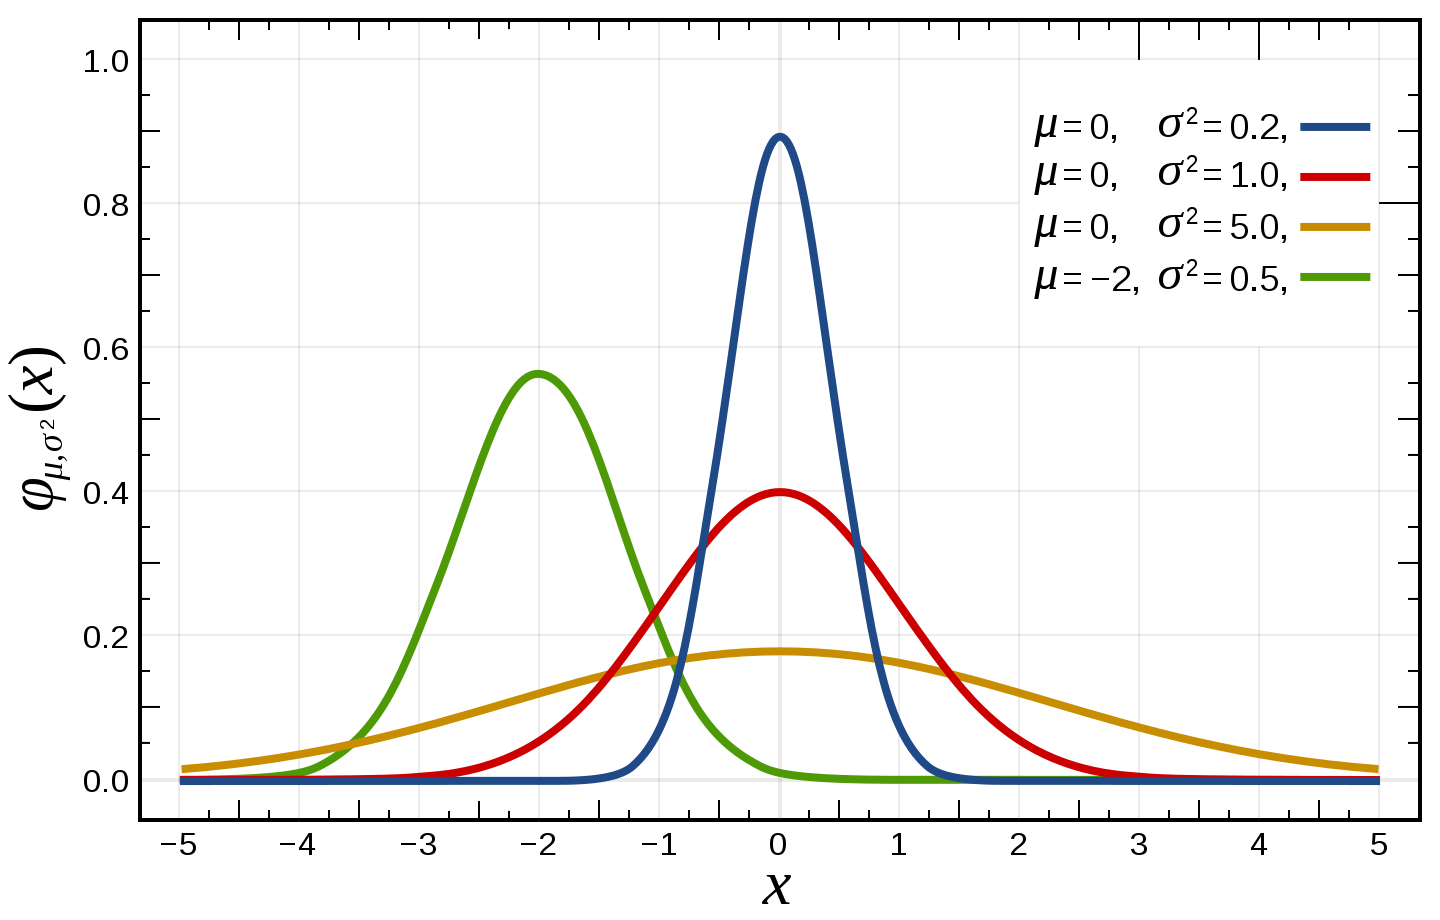 PDF of normal distributions